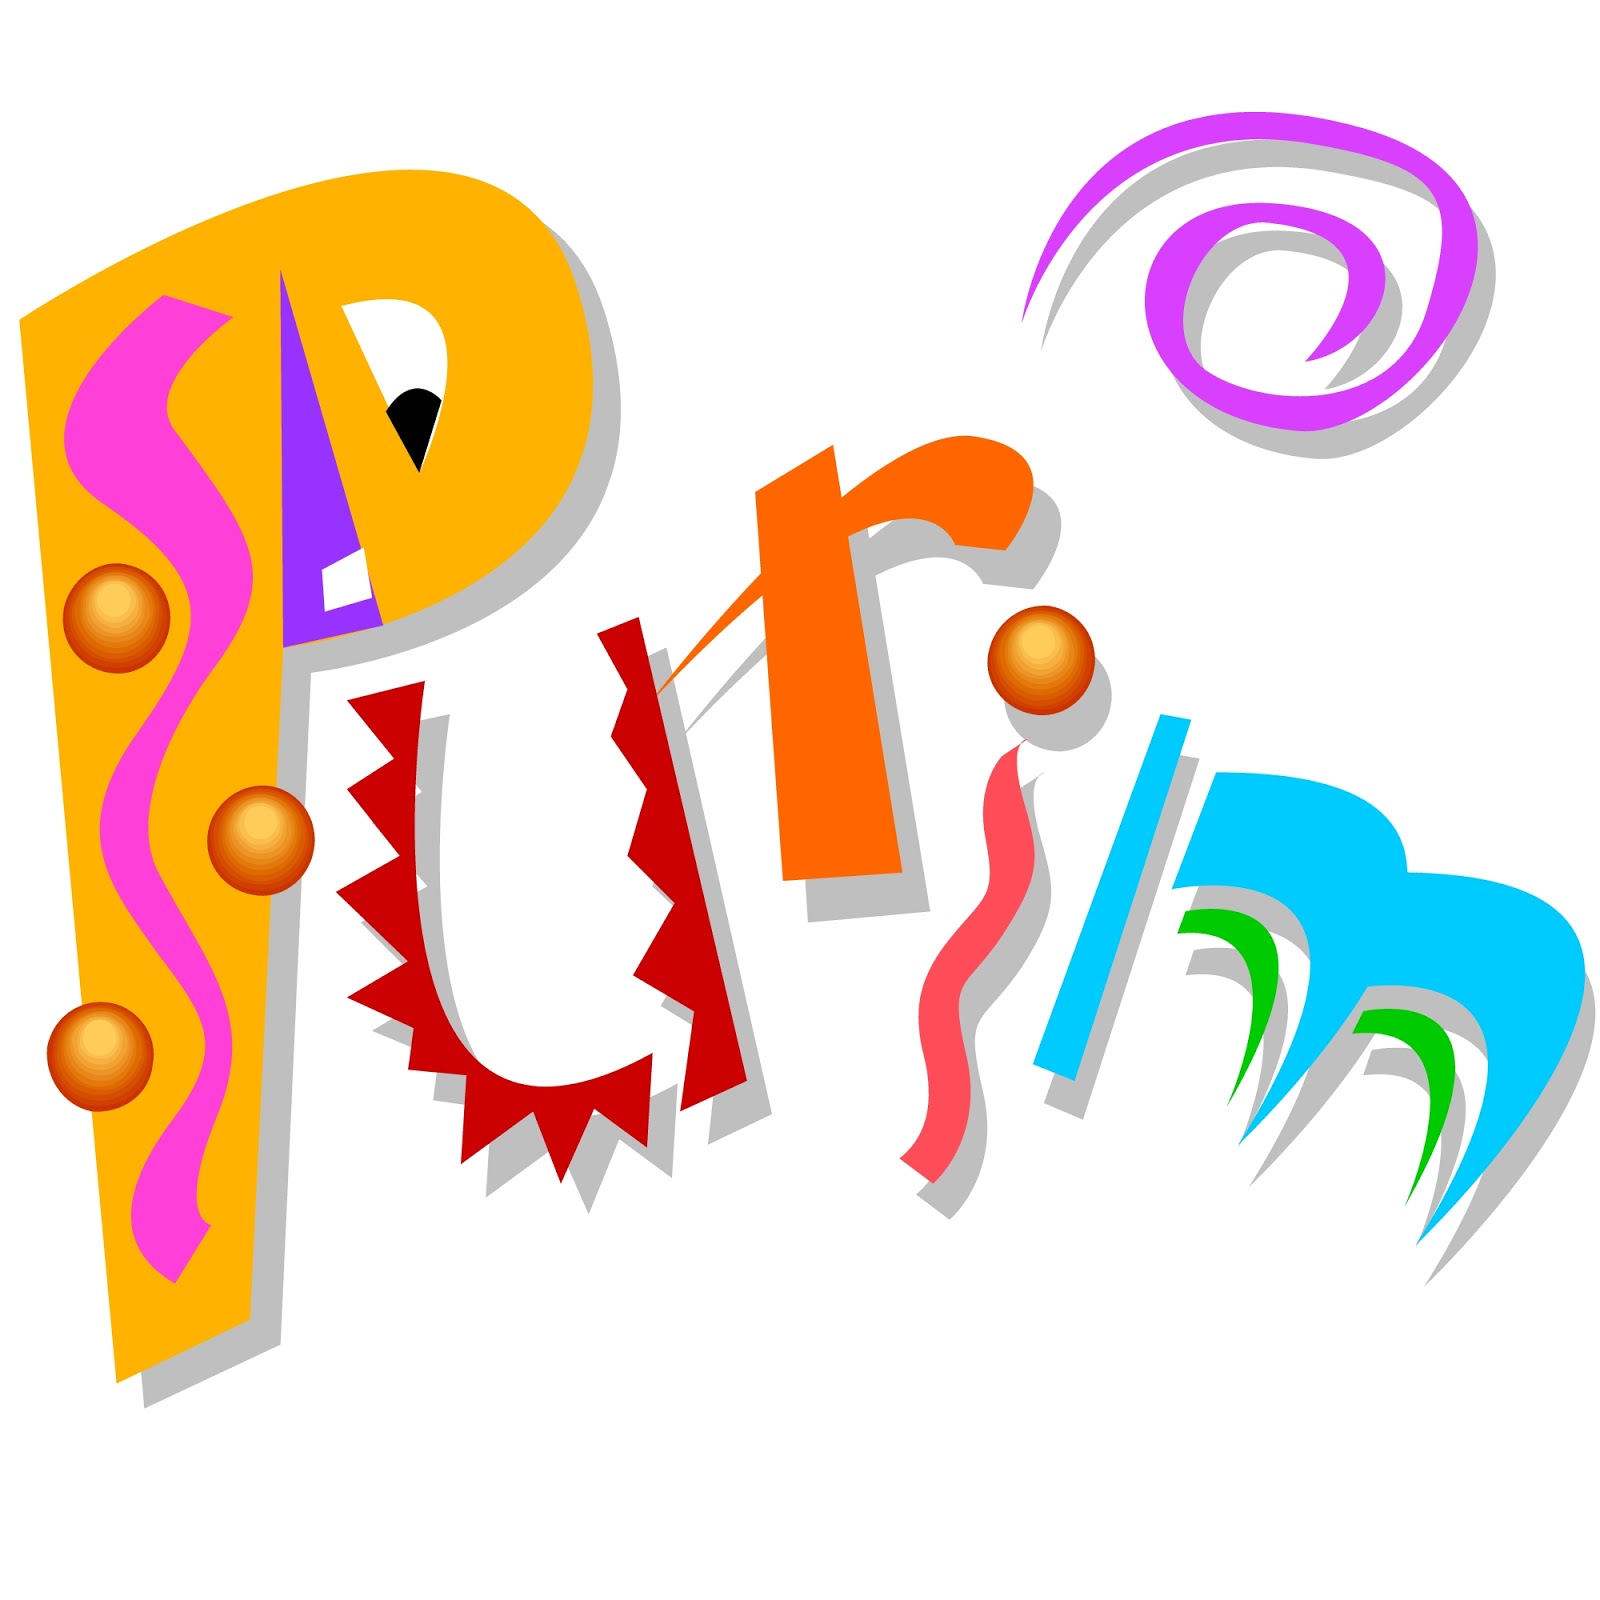 ... ClipArt Best; The Purim Page; Shir Hadash Weekly Newsletter: Shir  Hadash Weekly Newsletter .